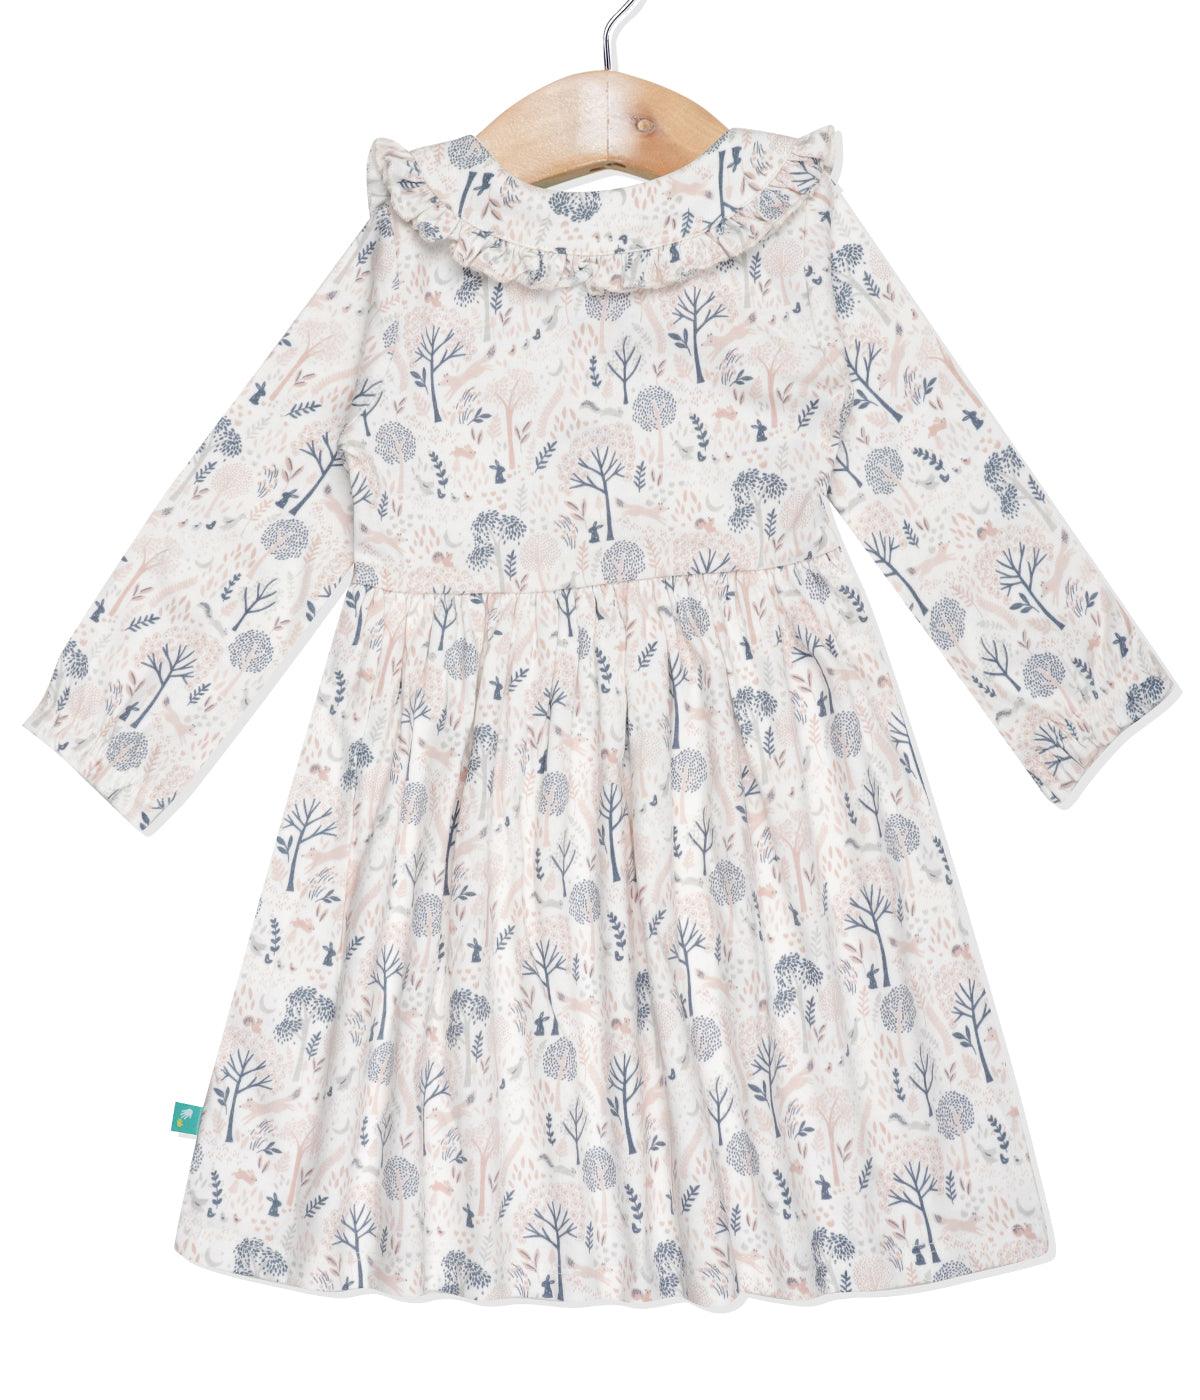 Baby Girls All Over Printed Casual Dress - White - Juscubs